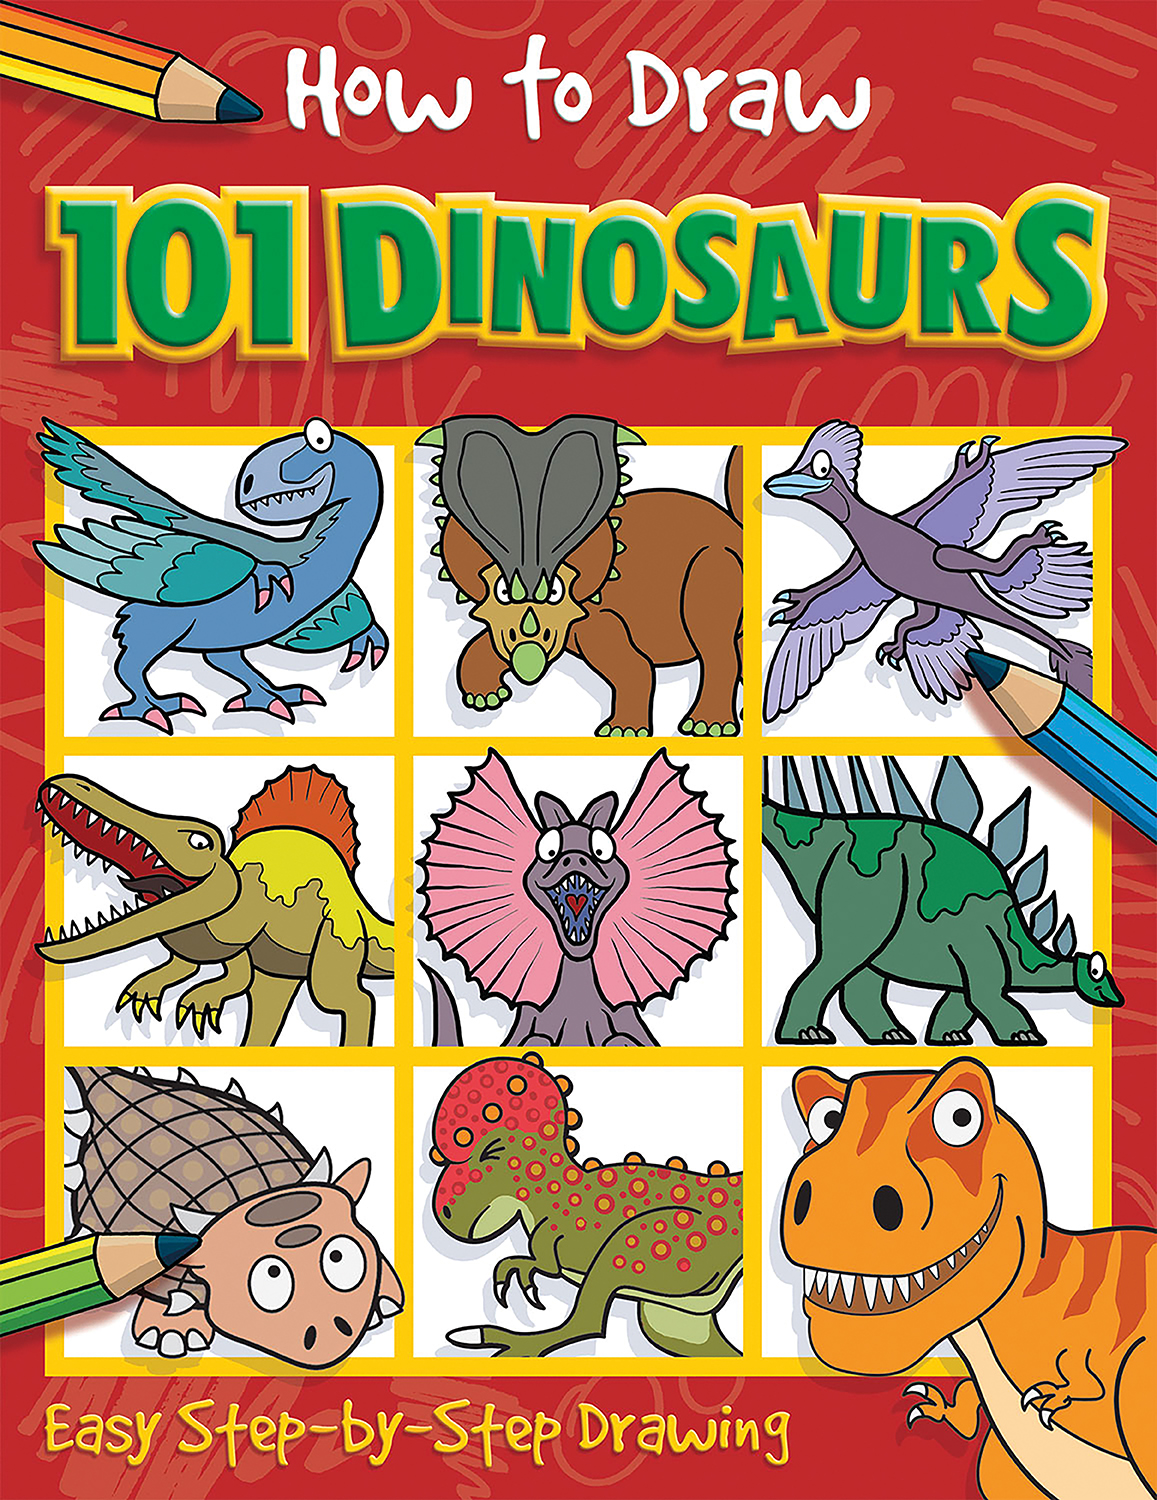 HOW TO DRAW 101 DINOSAURS